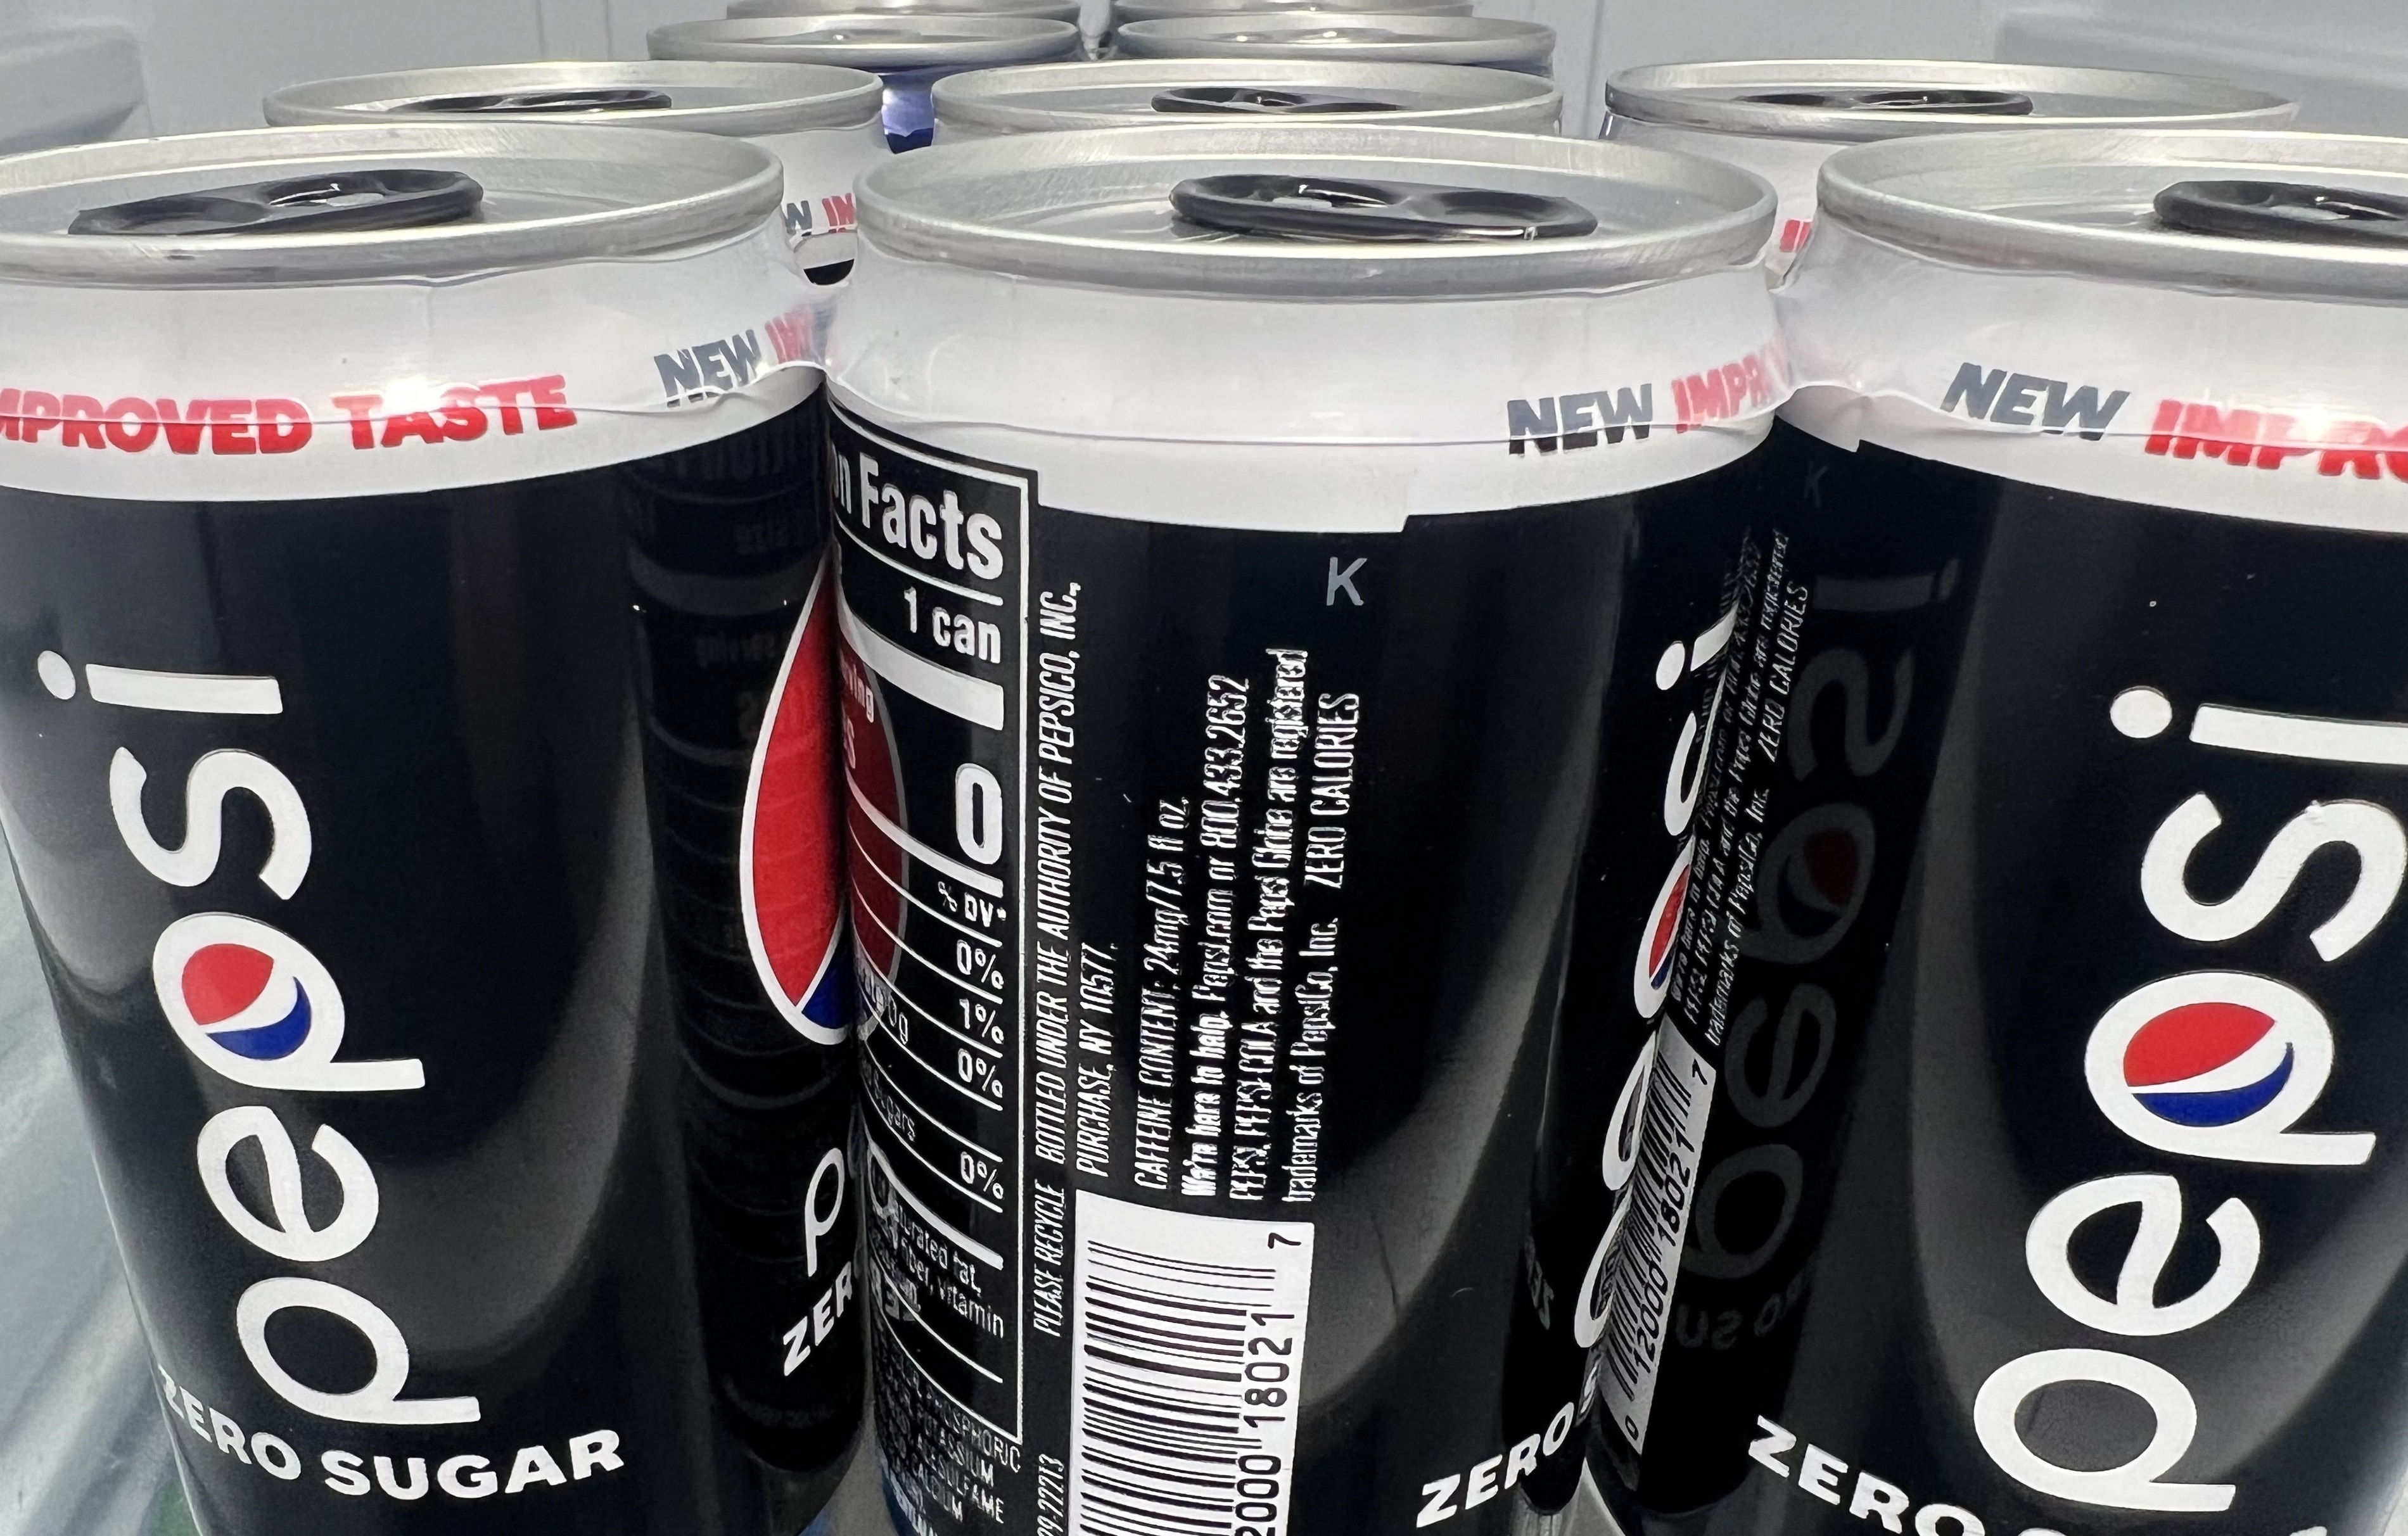 We tried the revamped Pepsi Zero Sugar; Here's what we thought